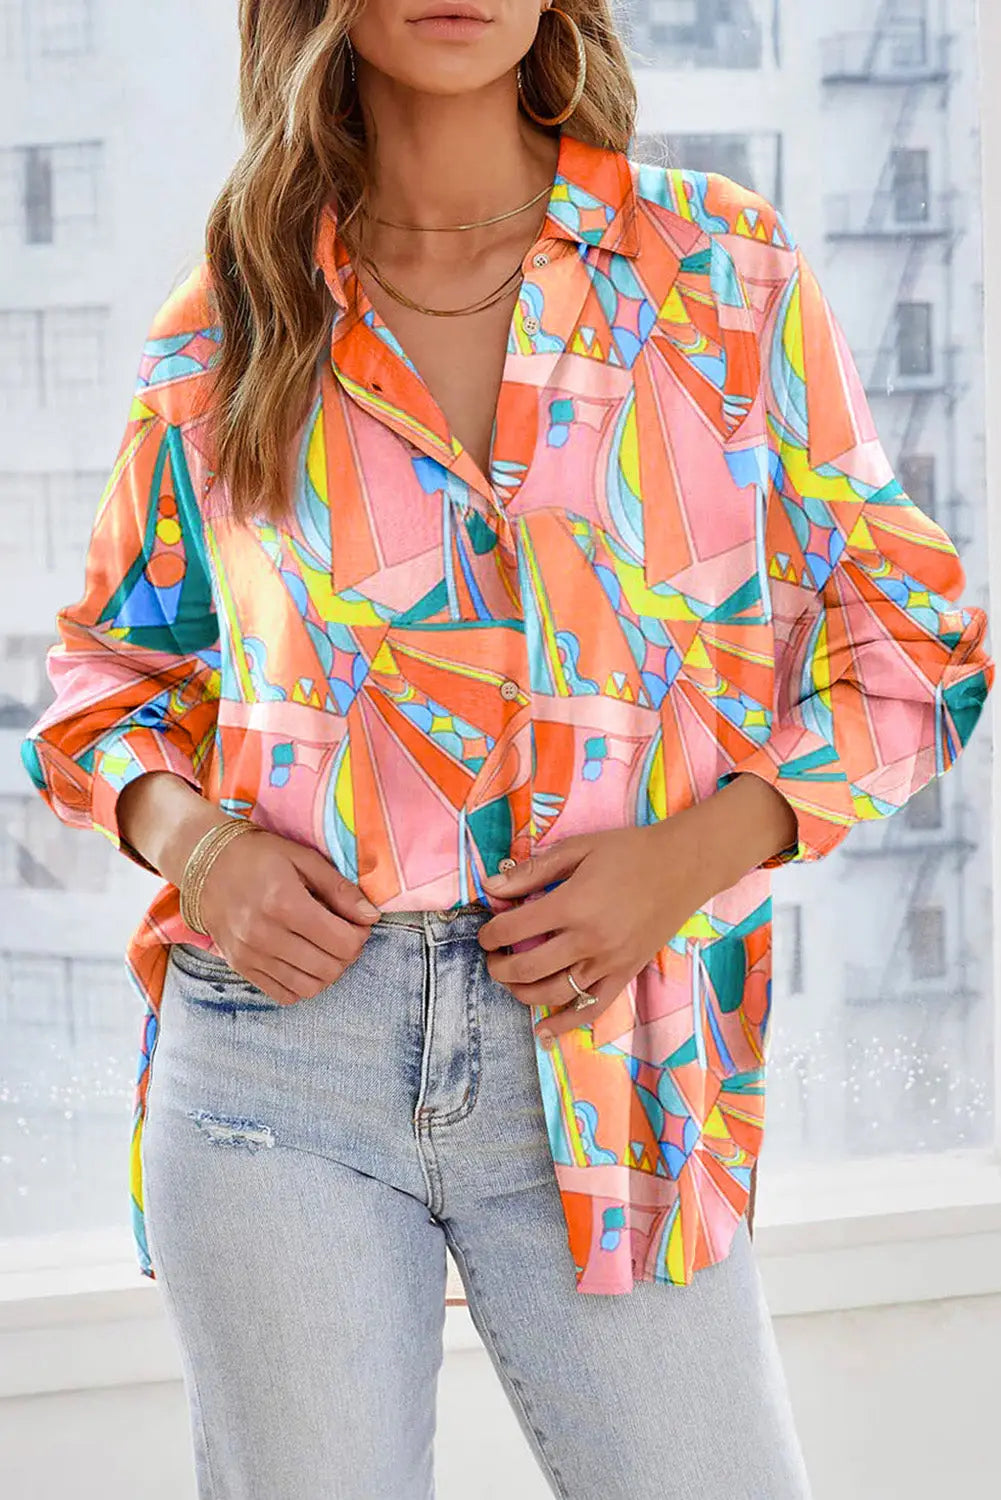 Multicolor geometric abstract print long sleeve shirt dress - multicolor6 / s / 100% polyester - mini dresses